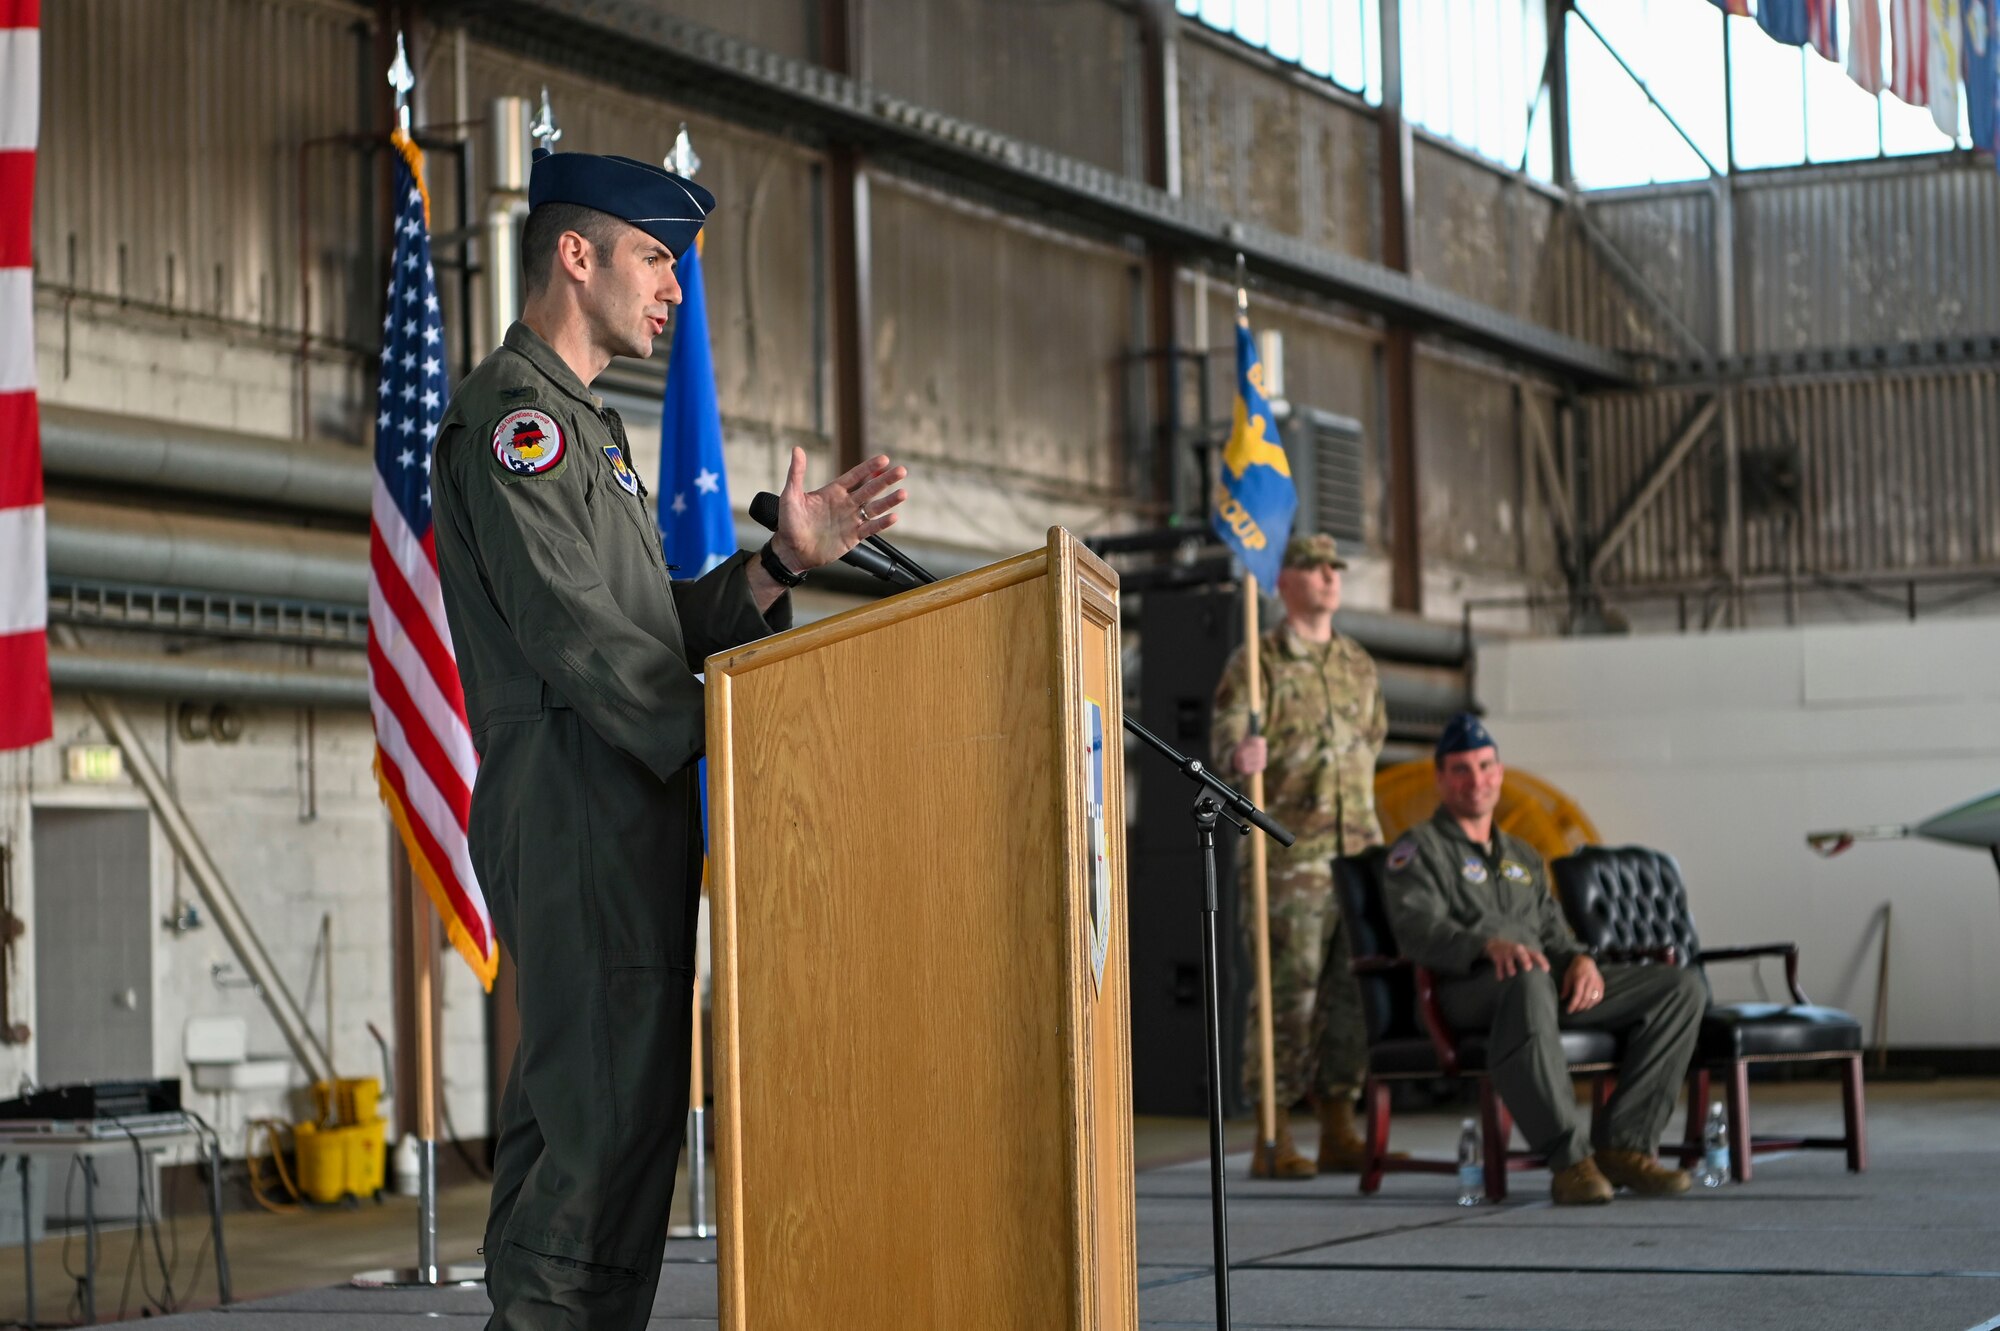 Col. Thomas Graham, 52nd Operations Group commander gives his first speech during his assumption of command, June 28, 2022, on Spangdahlem Air Base, Germany. Graham was previously the Assistant Air Attaché at the U.S. Embassy, London, United Kingdom, before assuming his new role. (U.S. Air Force photo by Senior Airman Jessica Sanchez-Chen)